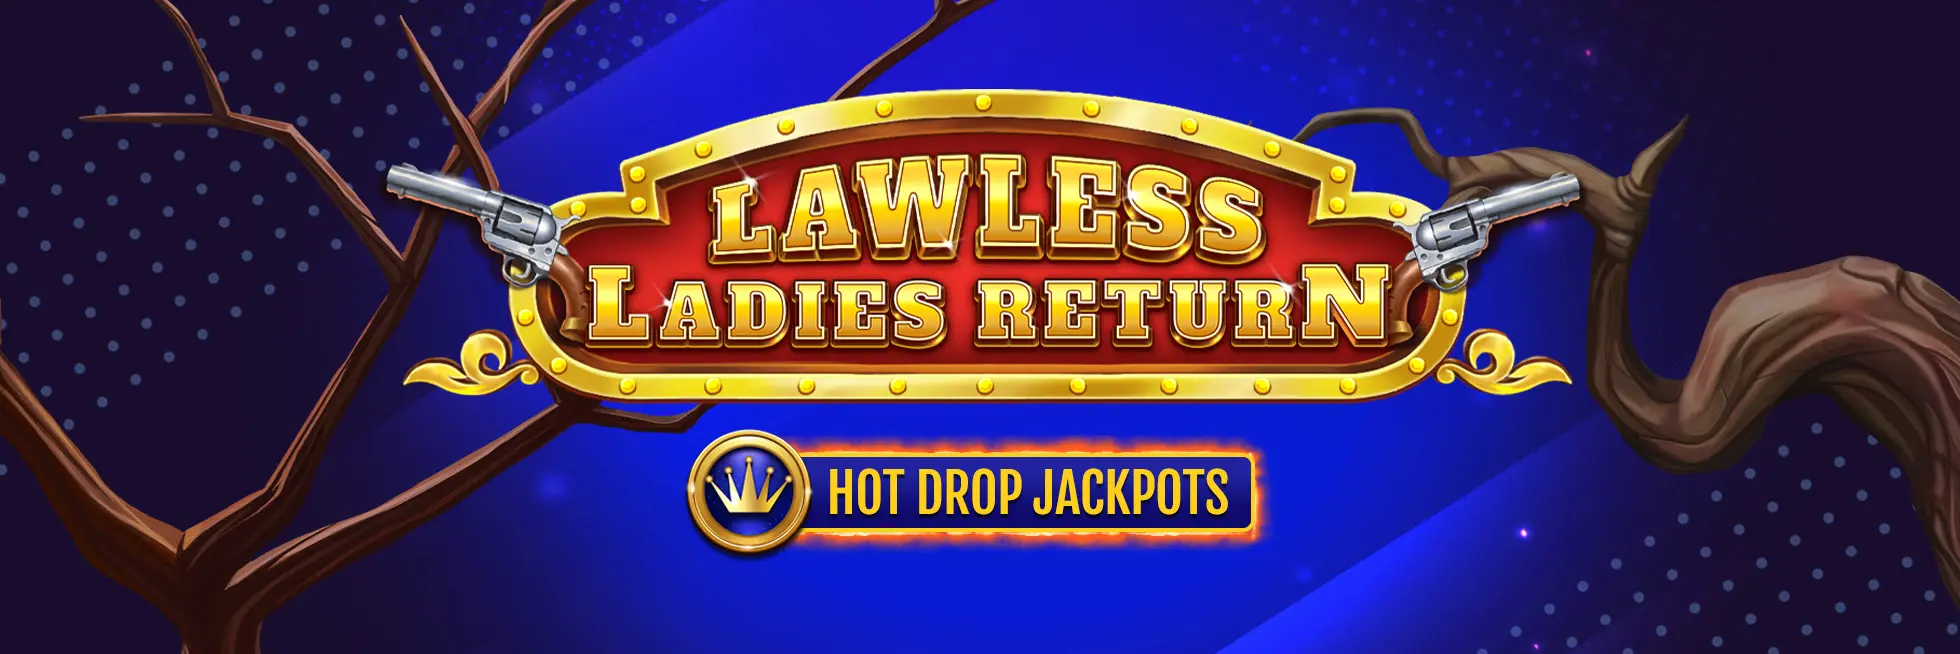 Discover the thrill of the Wild West in Lawless Ladies Return at Slots.lv, where legendary adventures, Random Wilds, and the Hot Drop Jackpot promise epic wins.